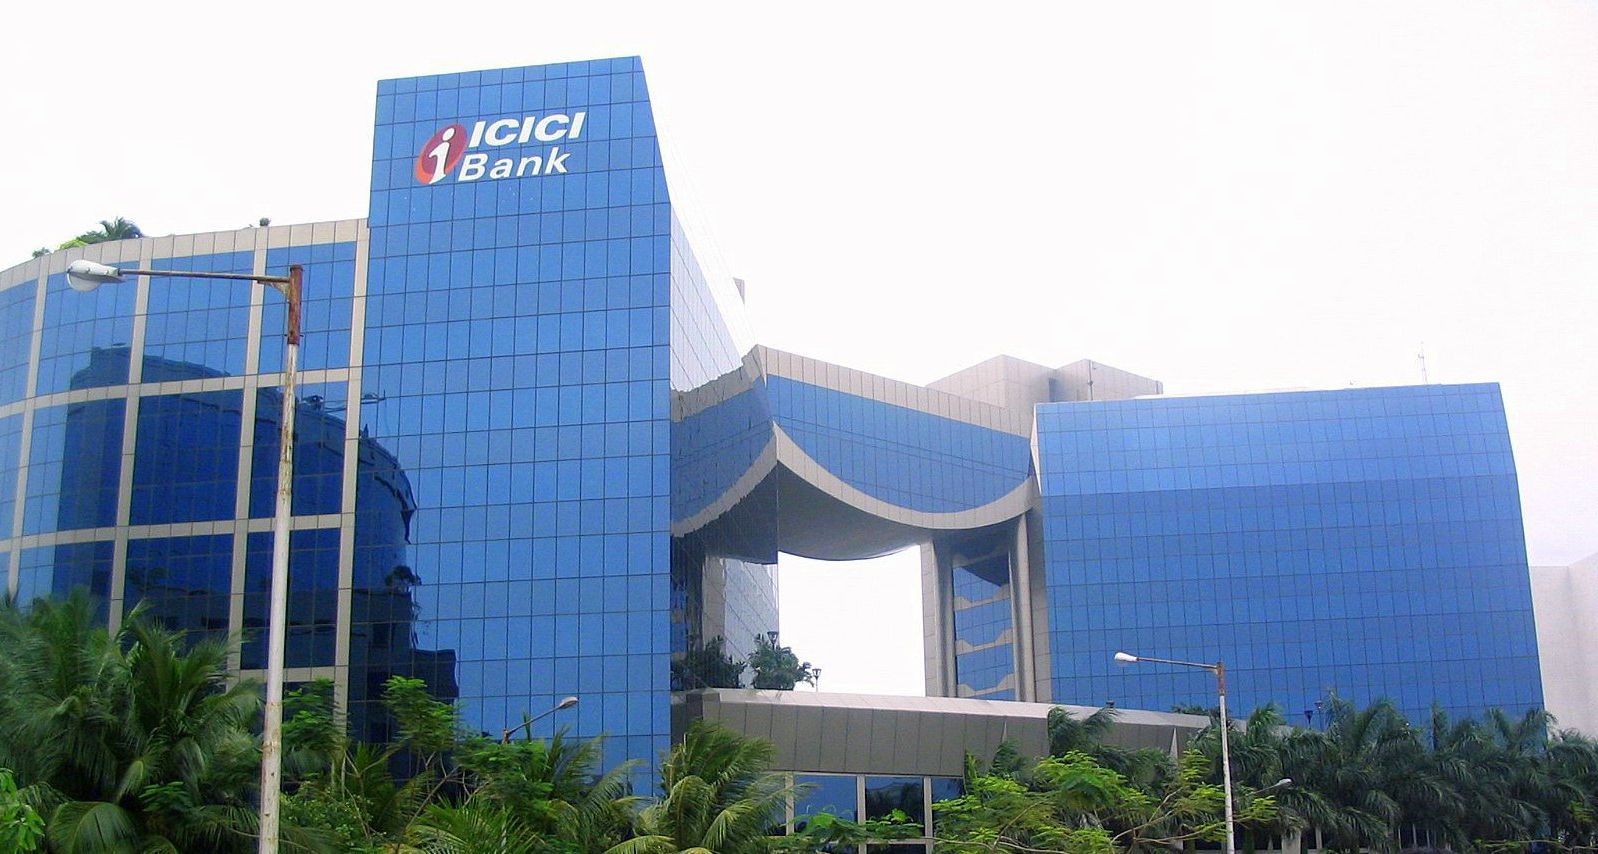 ICICI Bank is first in India to go live on Swift’s gpi service